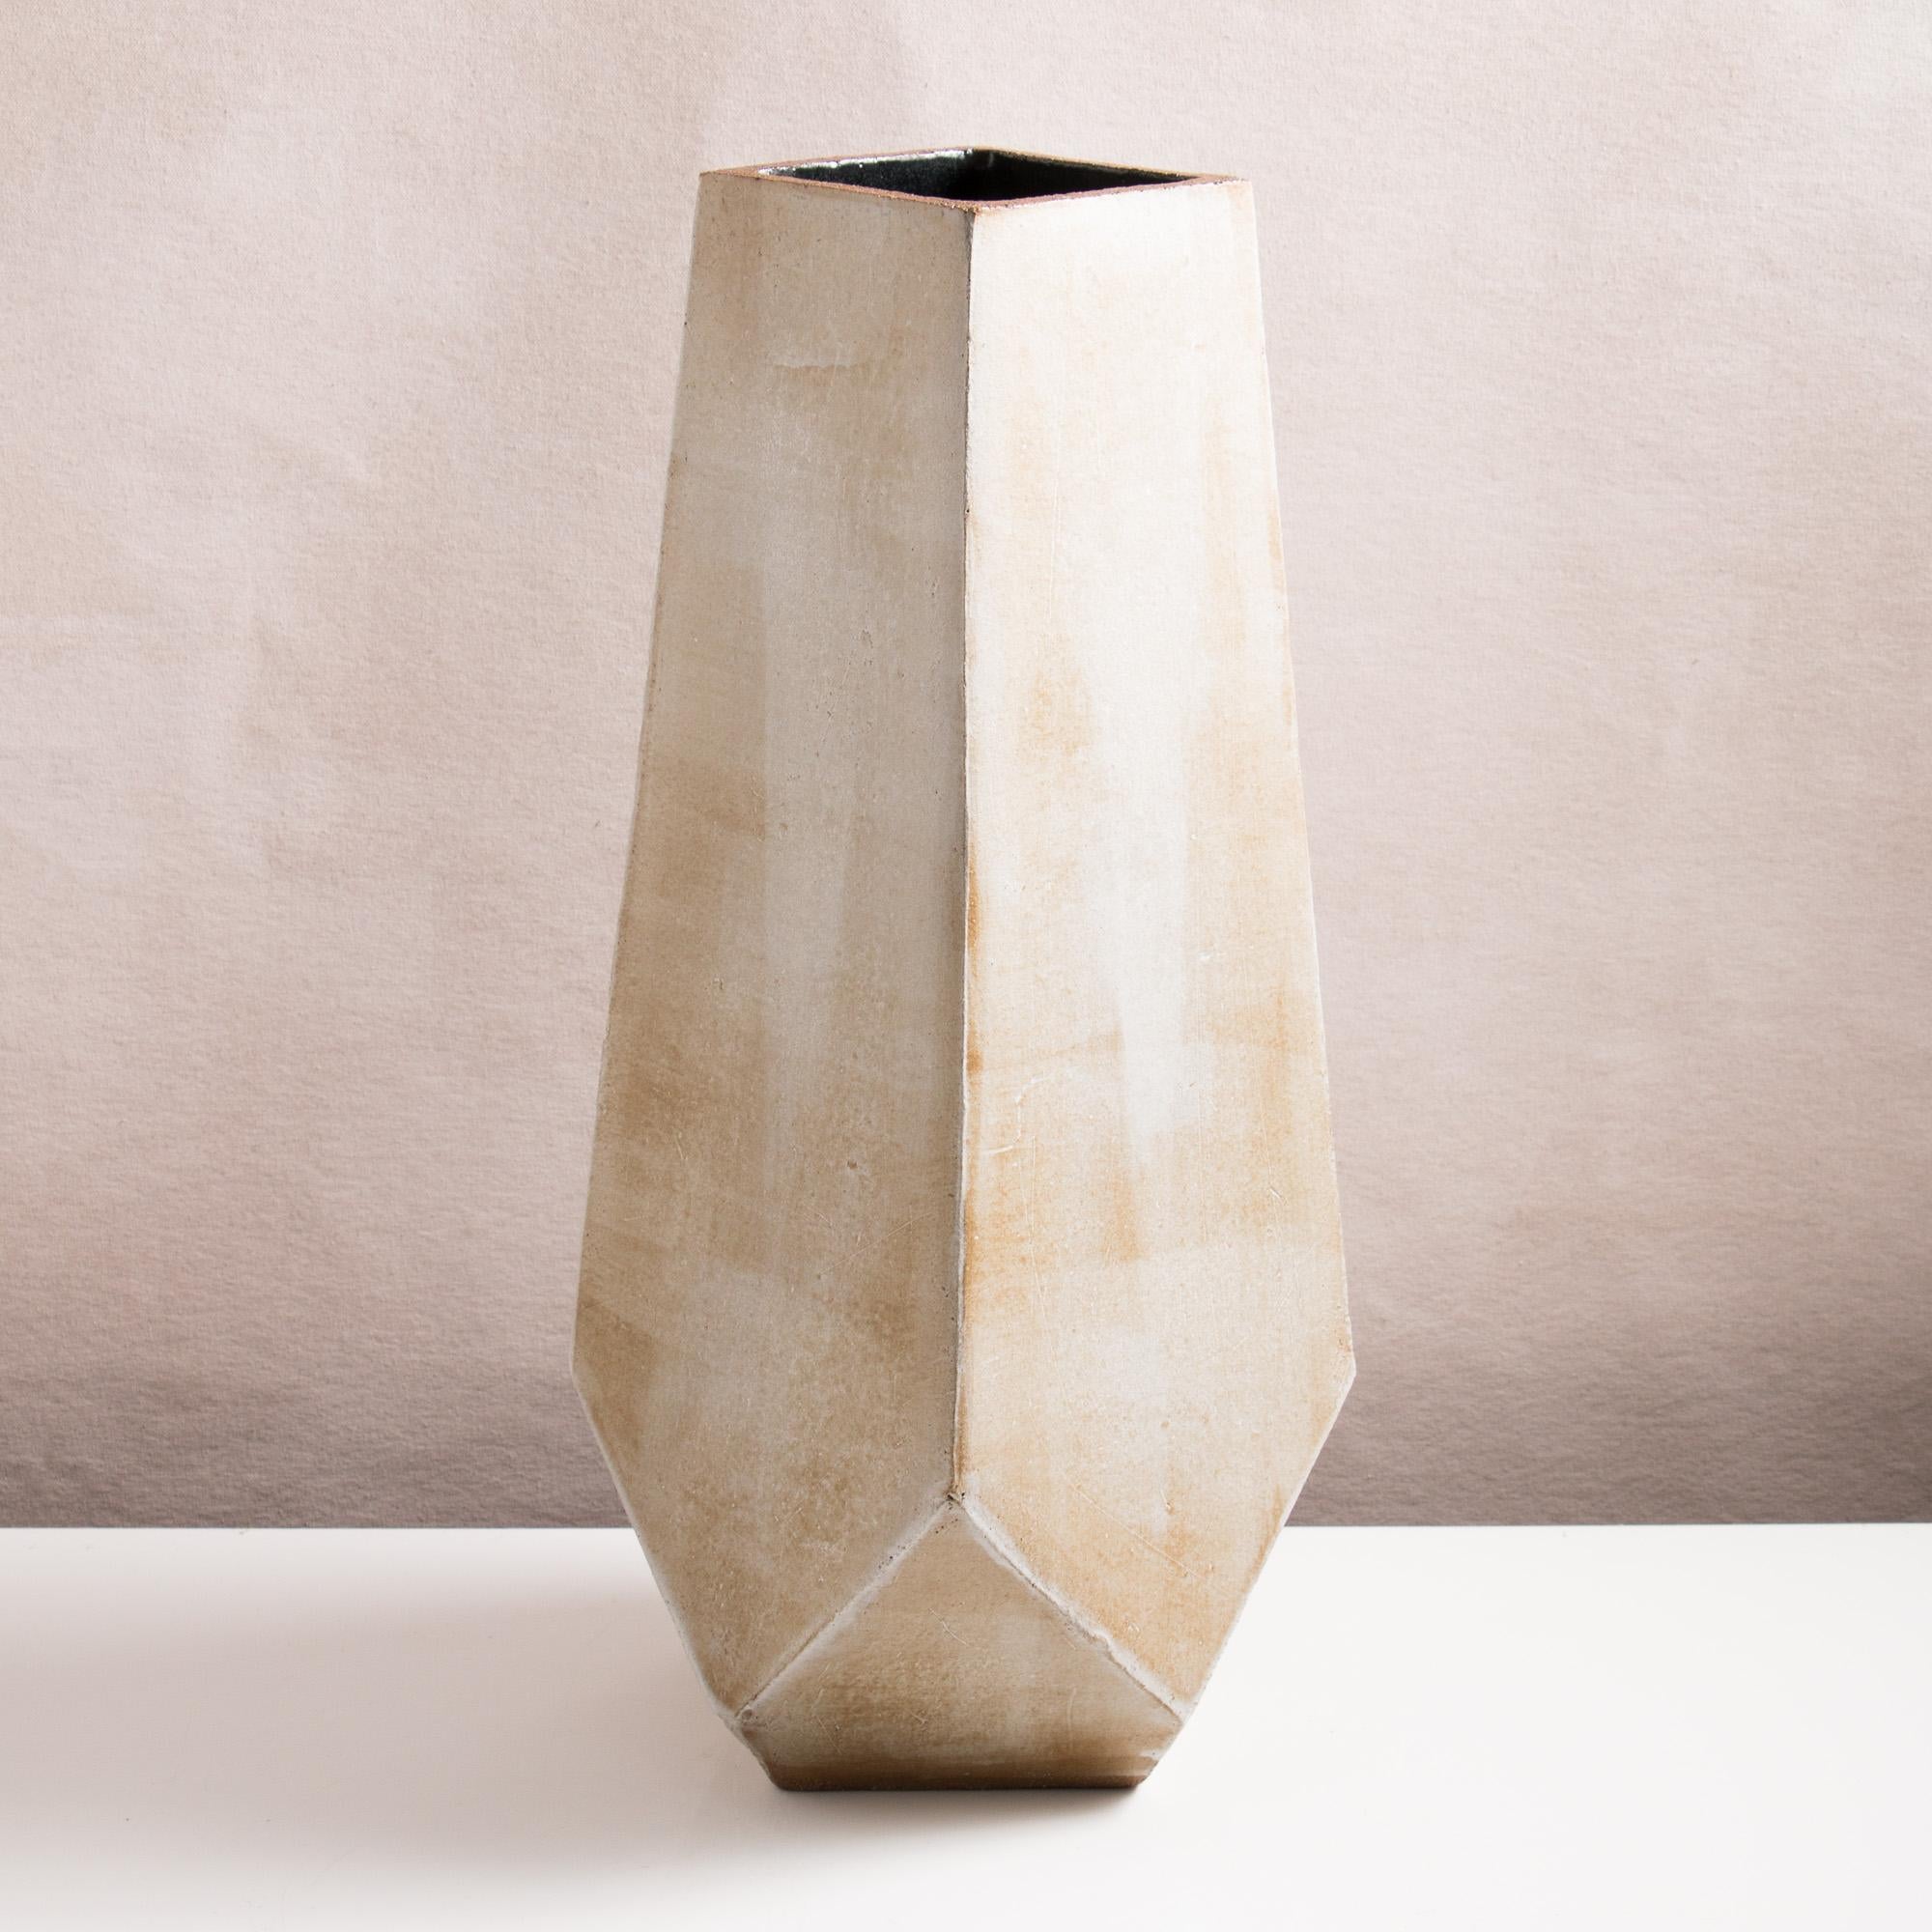 Inspired by midcentury Brutalist architecture, this massive ceramic vase combines clean geometric lines with the warmth and individuality inherent in handmade work. Perfect as a floor vase for branches or grasses, or as a dramatic table centrepiece.